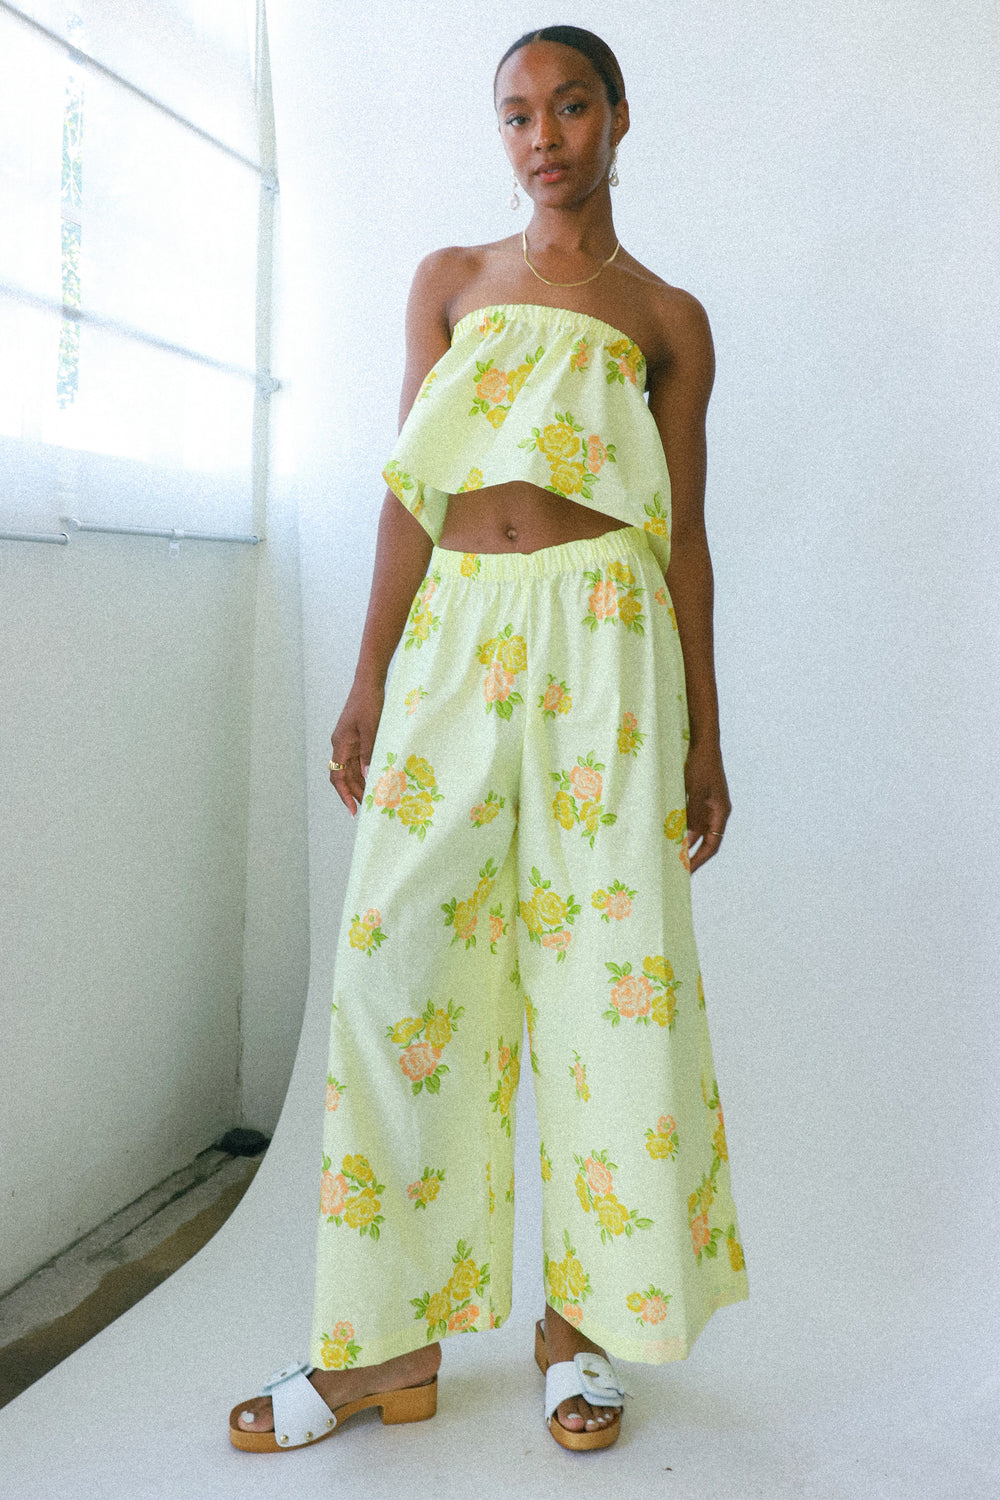 X PRISM Yellow Floral Strapless Top